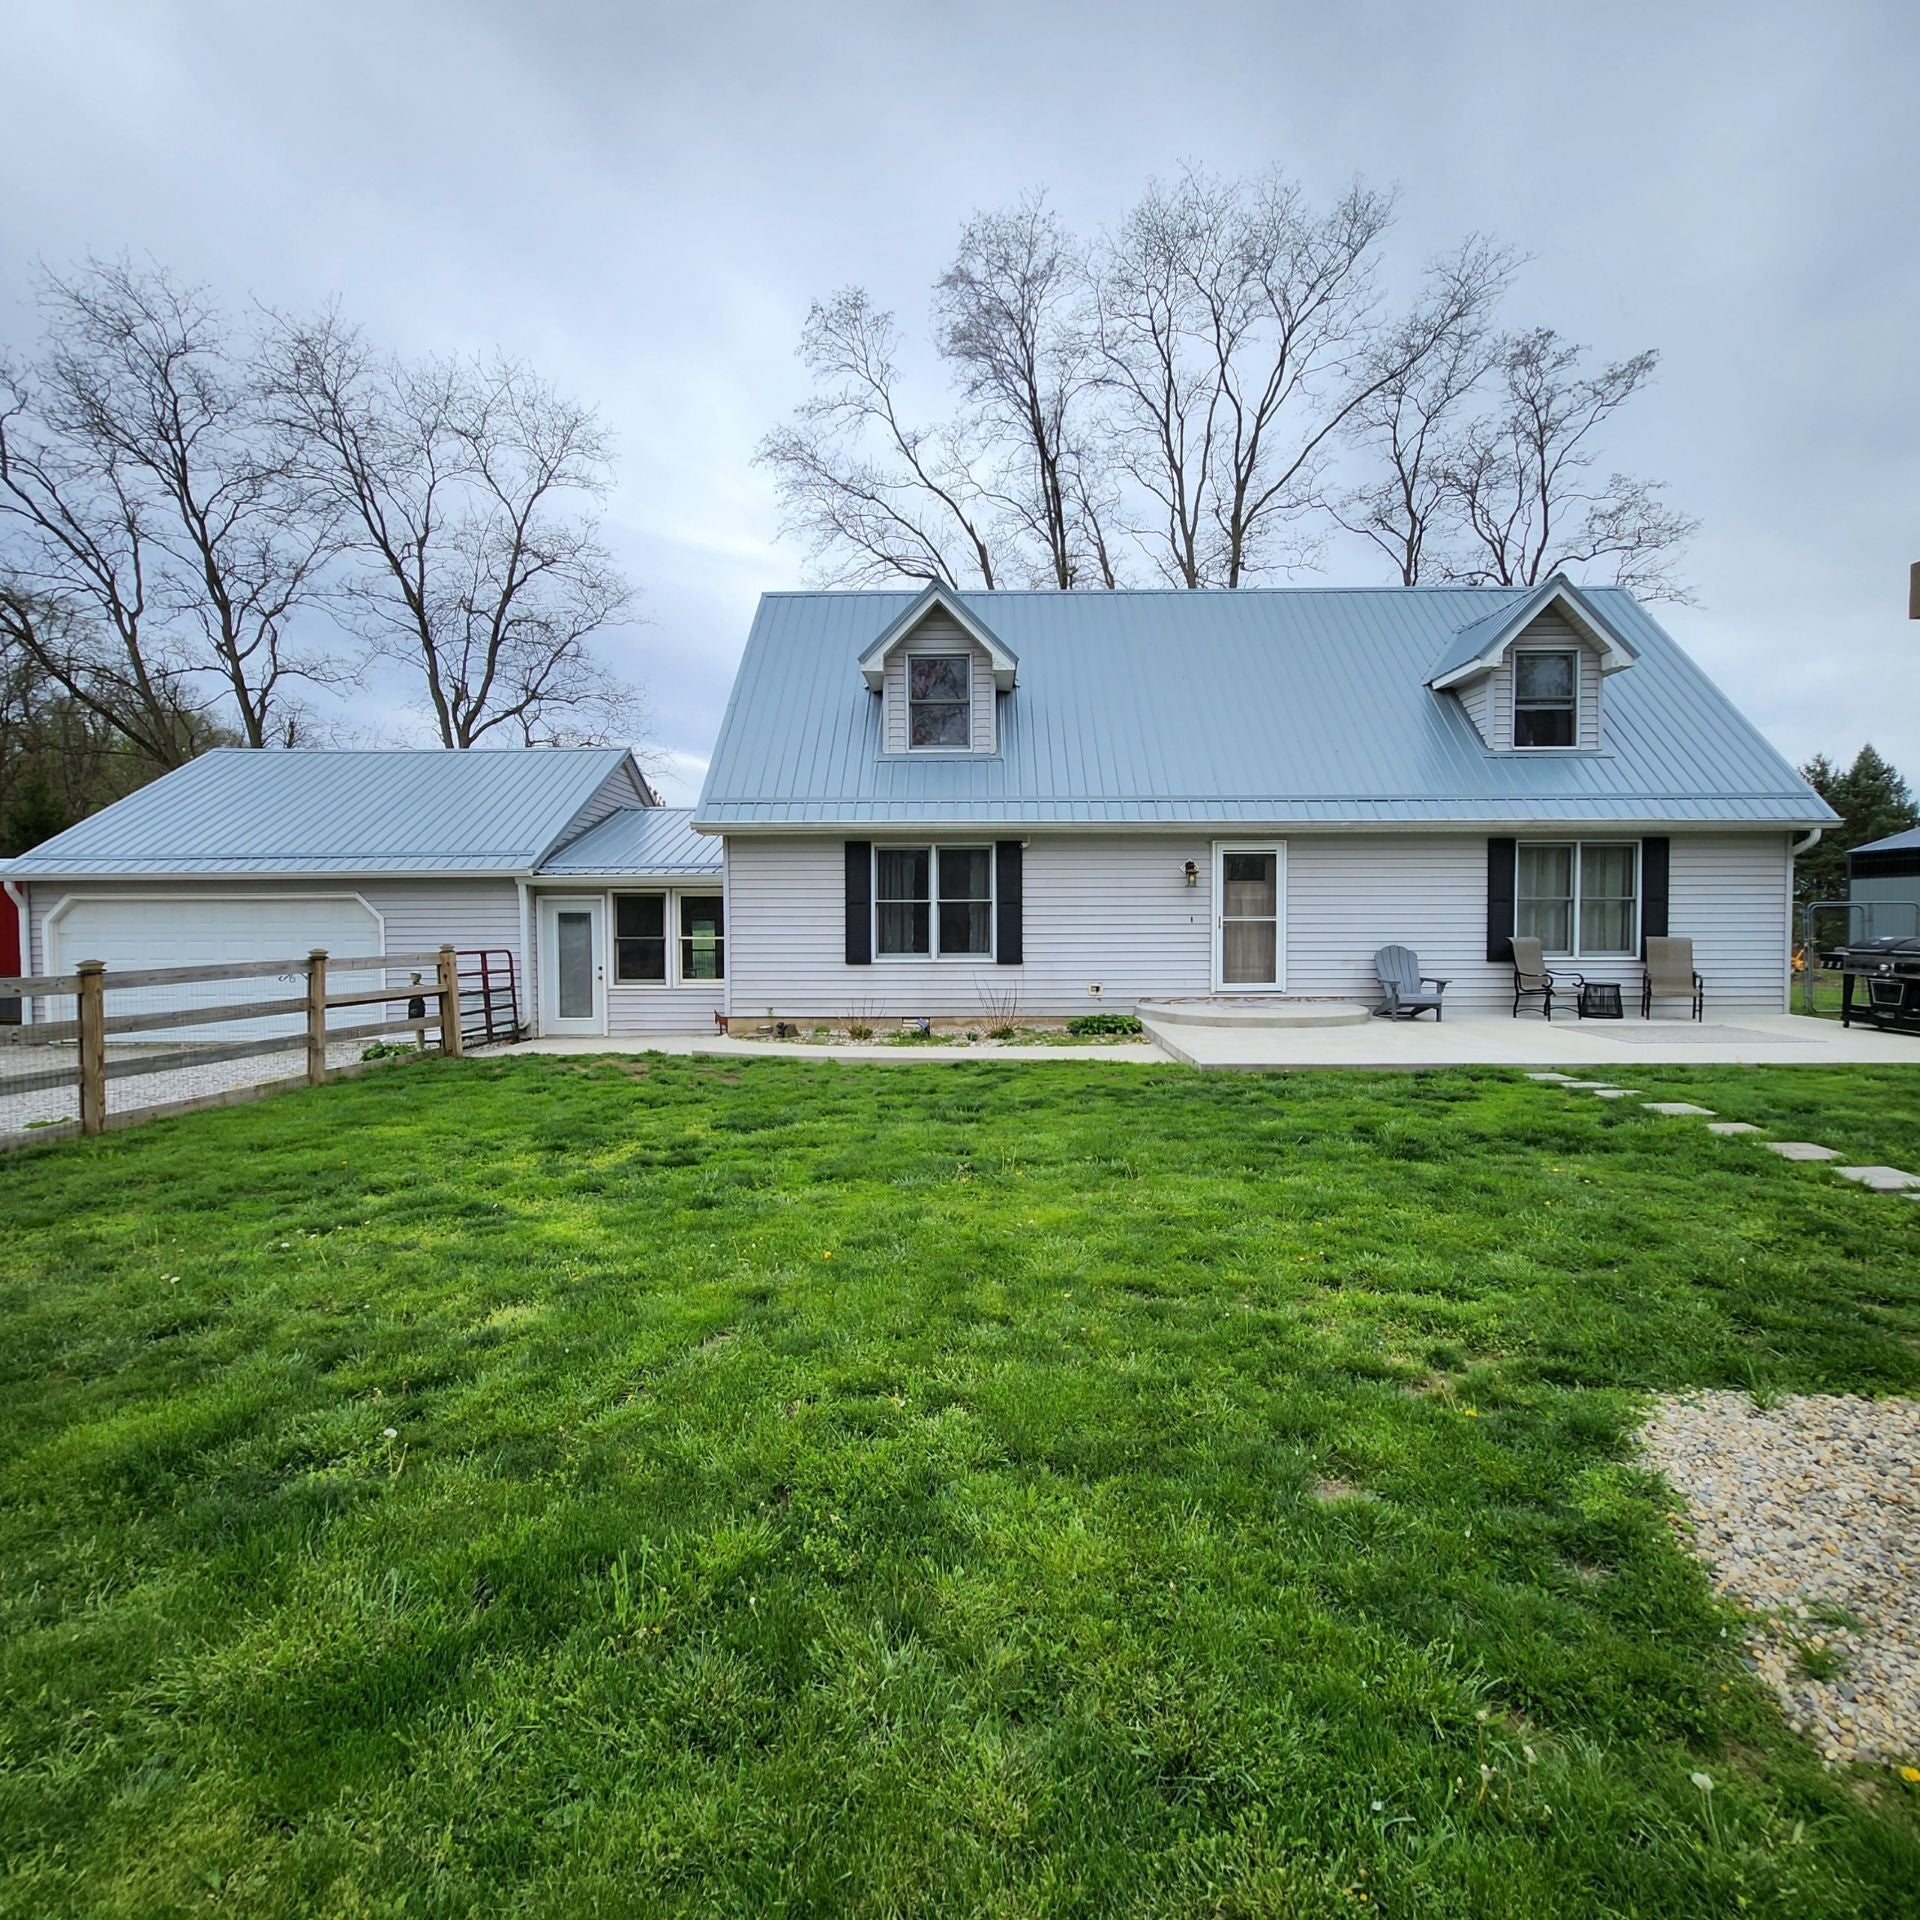 Photo of 10891 W State Road 47 Thorntown, IN 46071